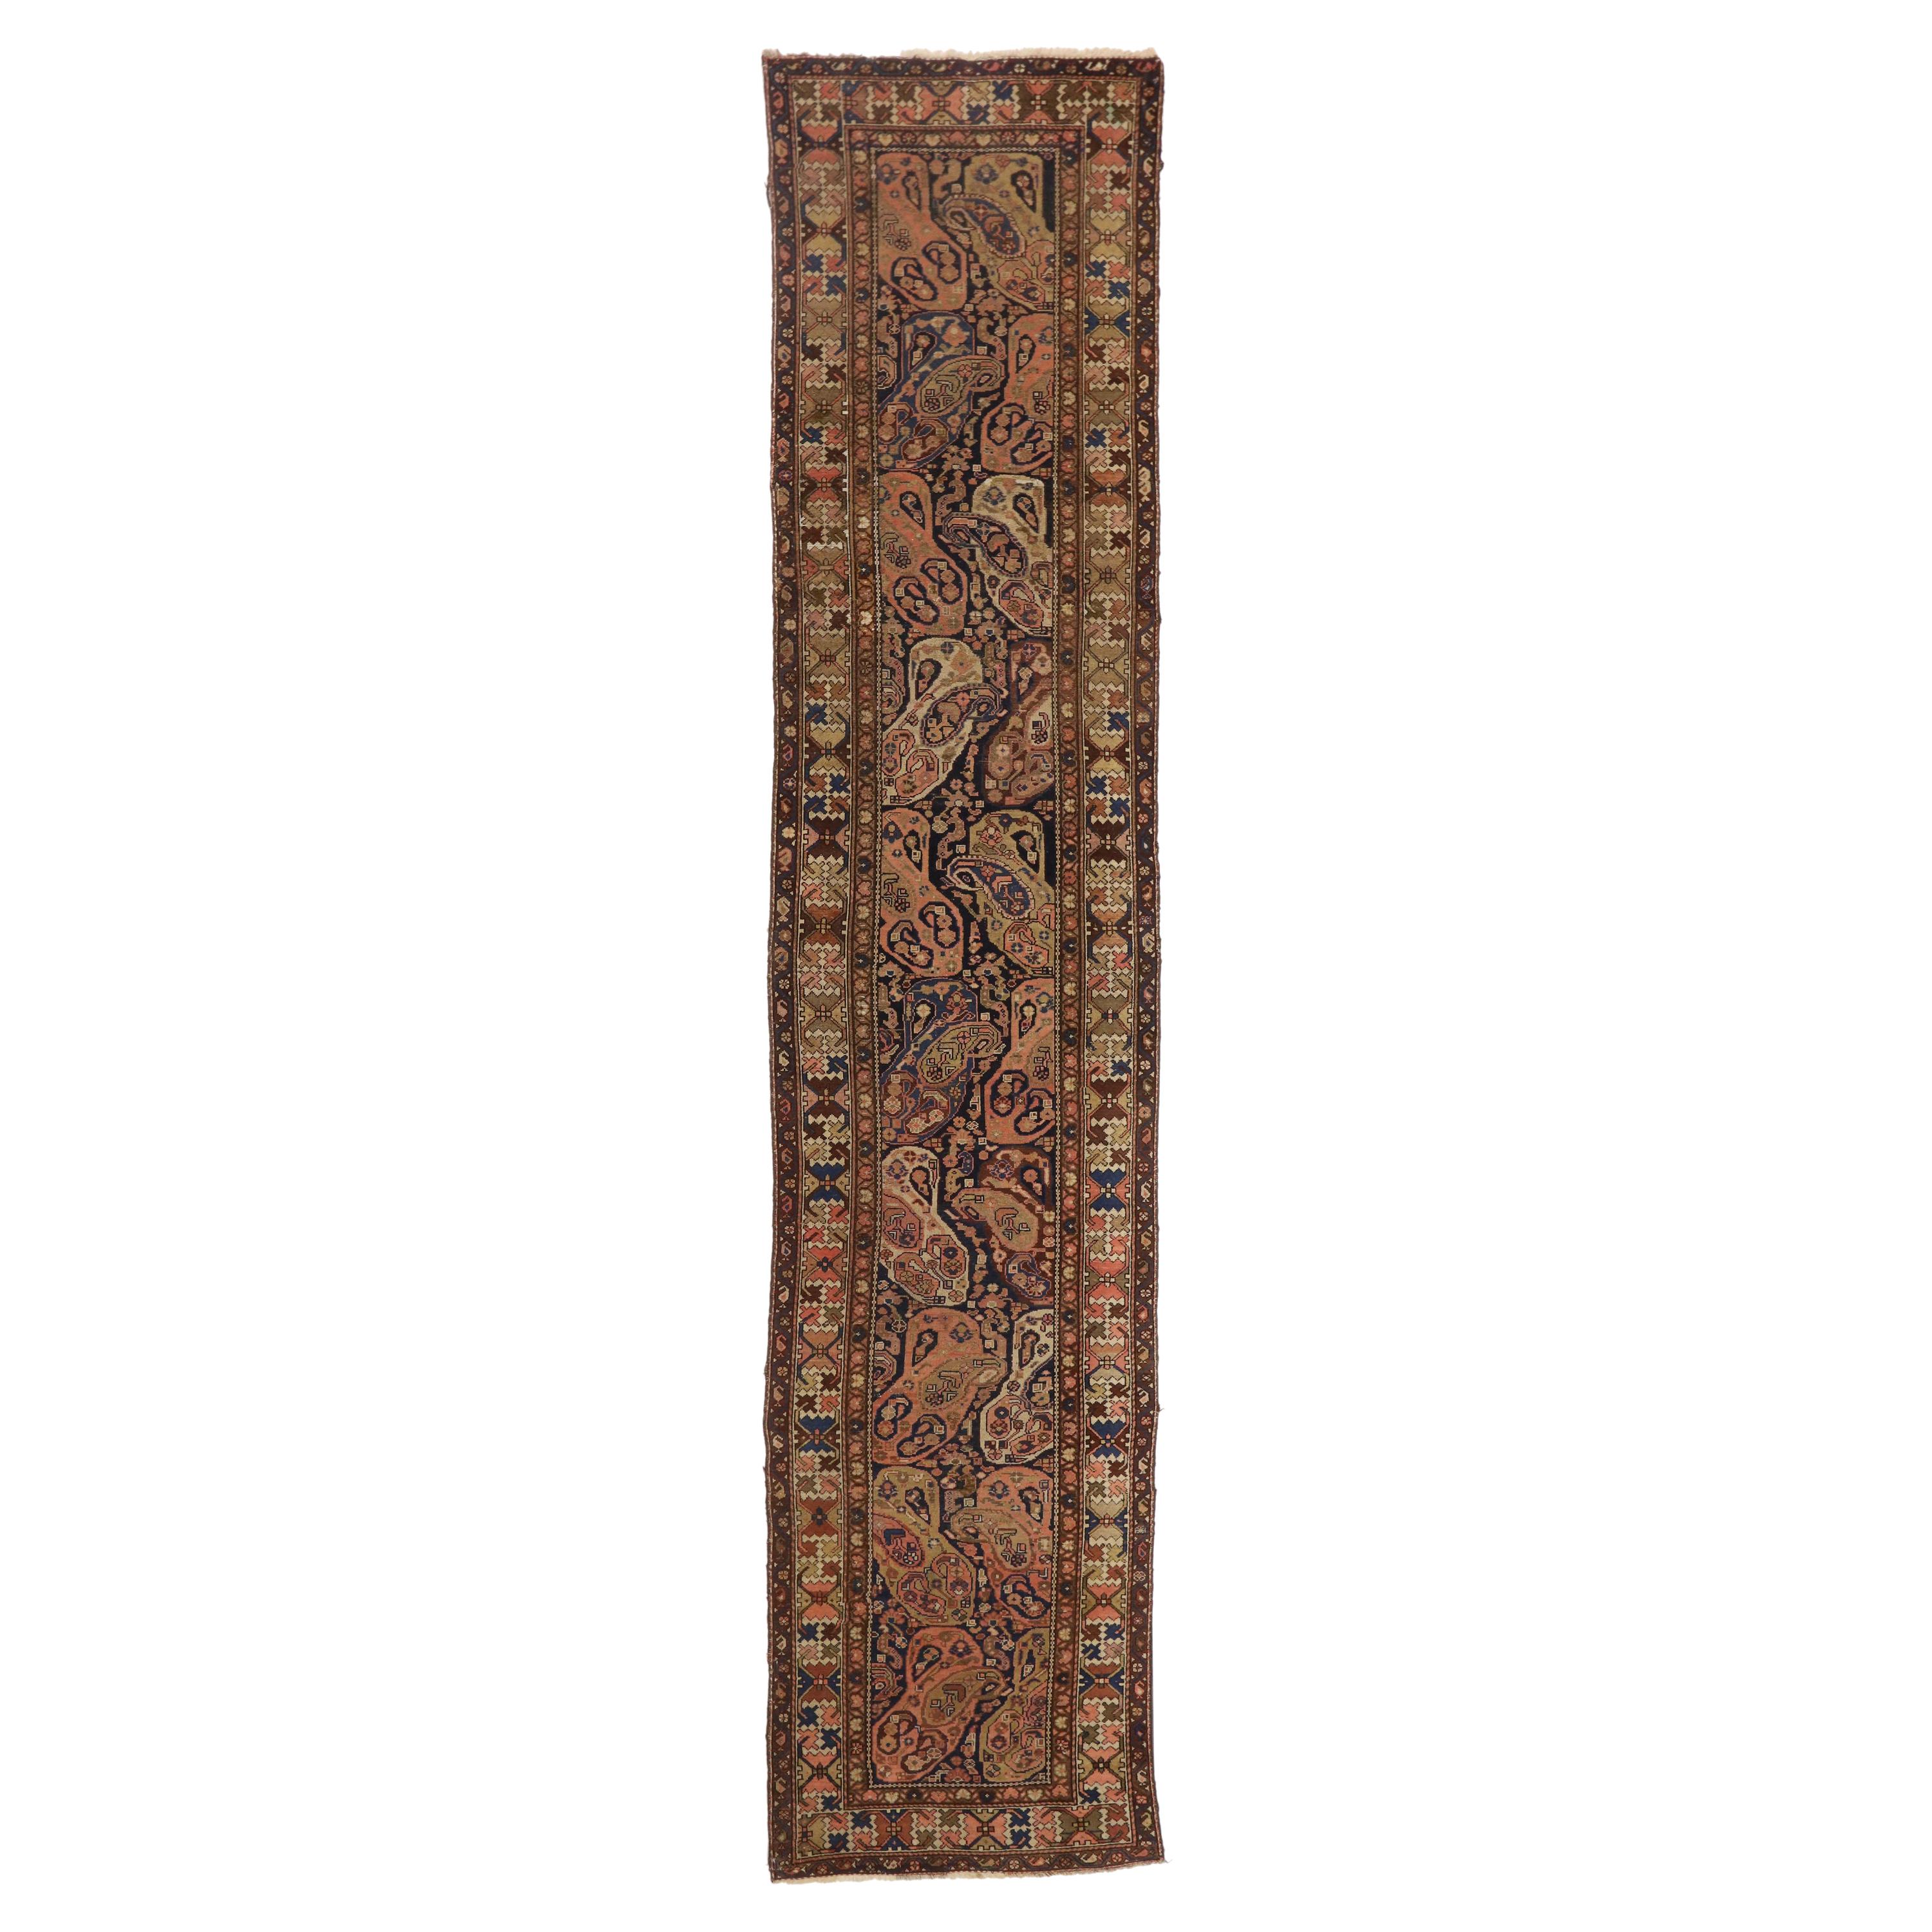 Antique Persian Malayer Runner with Boteh Design, Extra-Long Hallway Runner